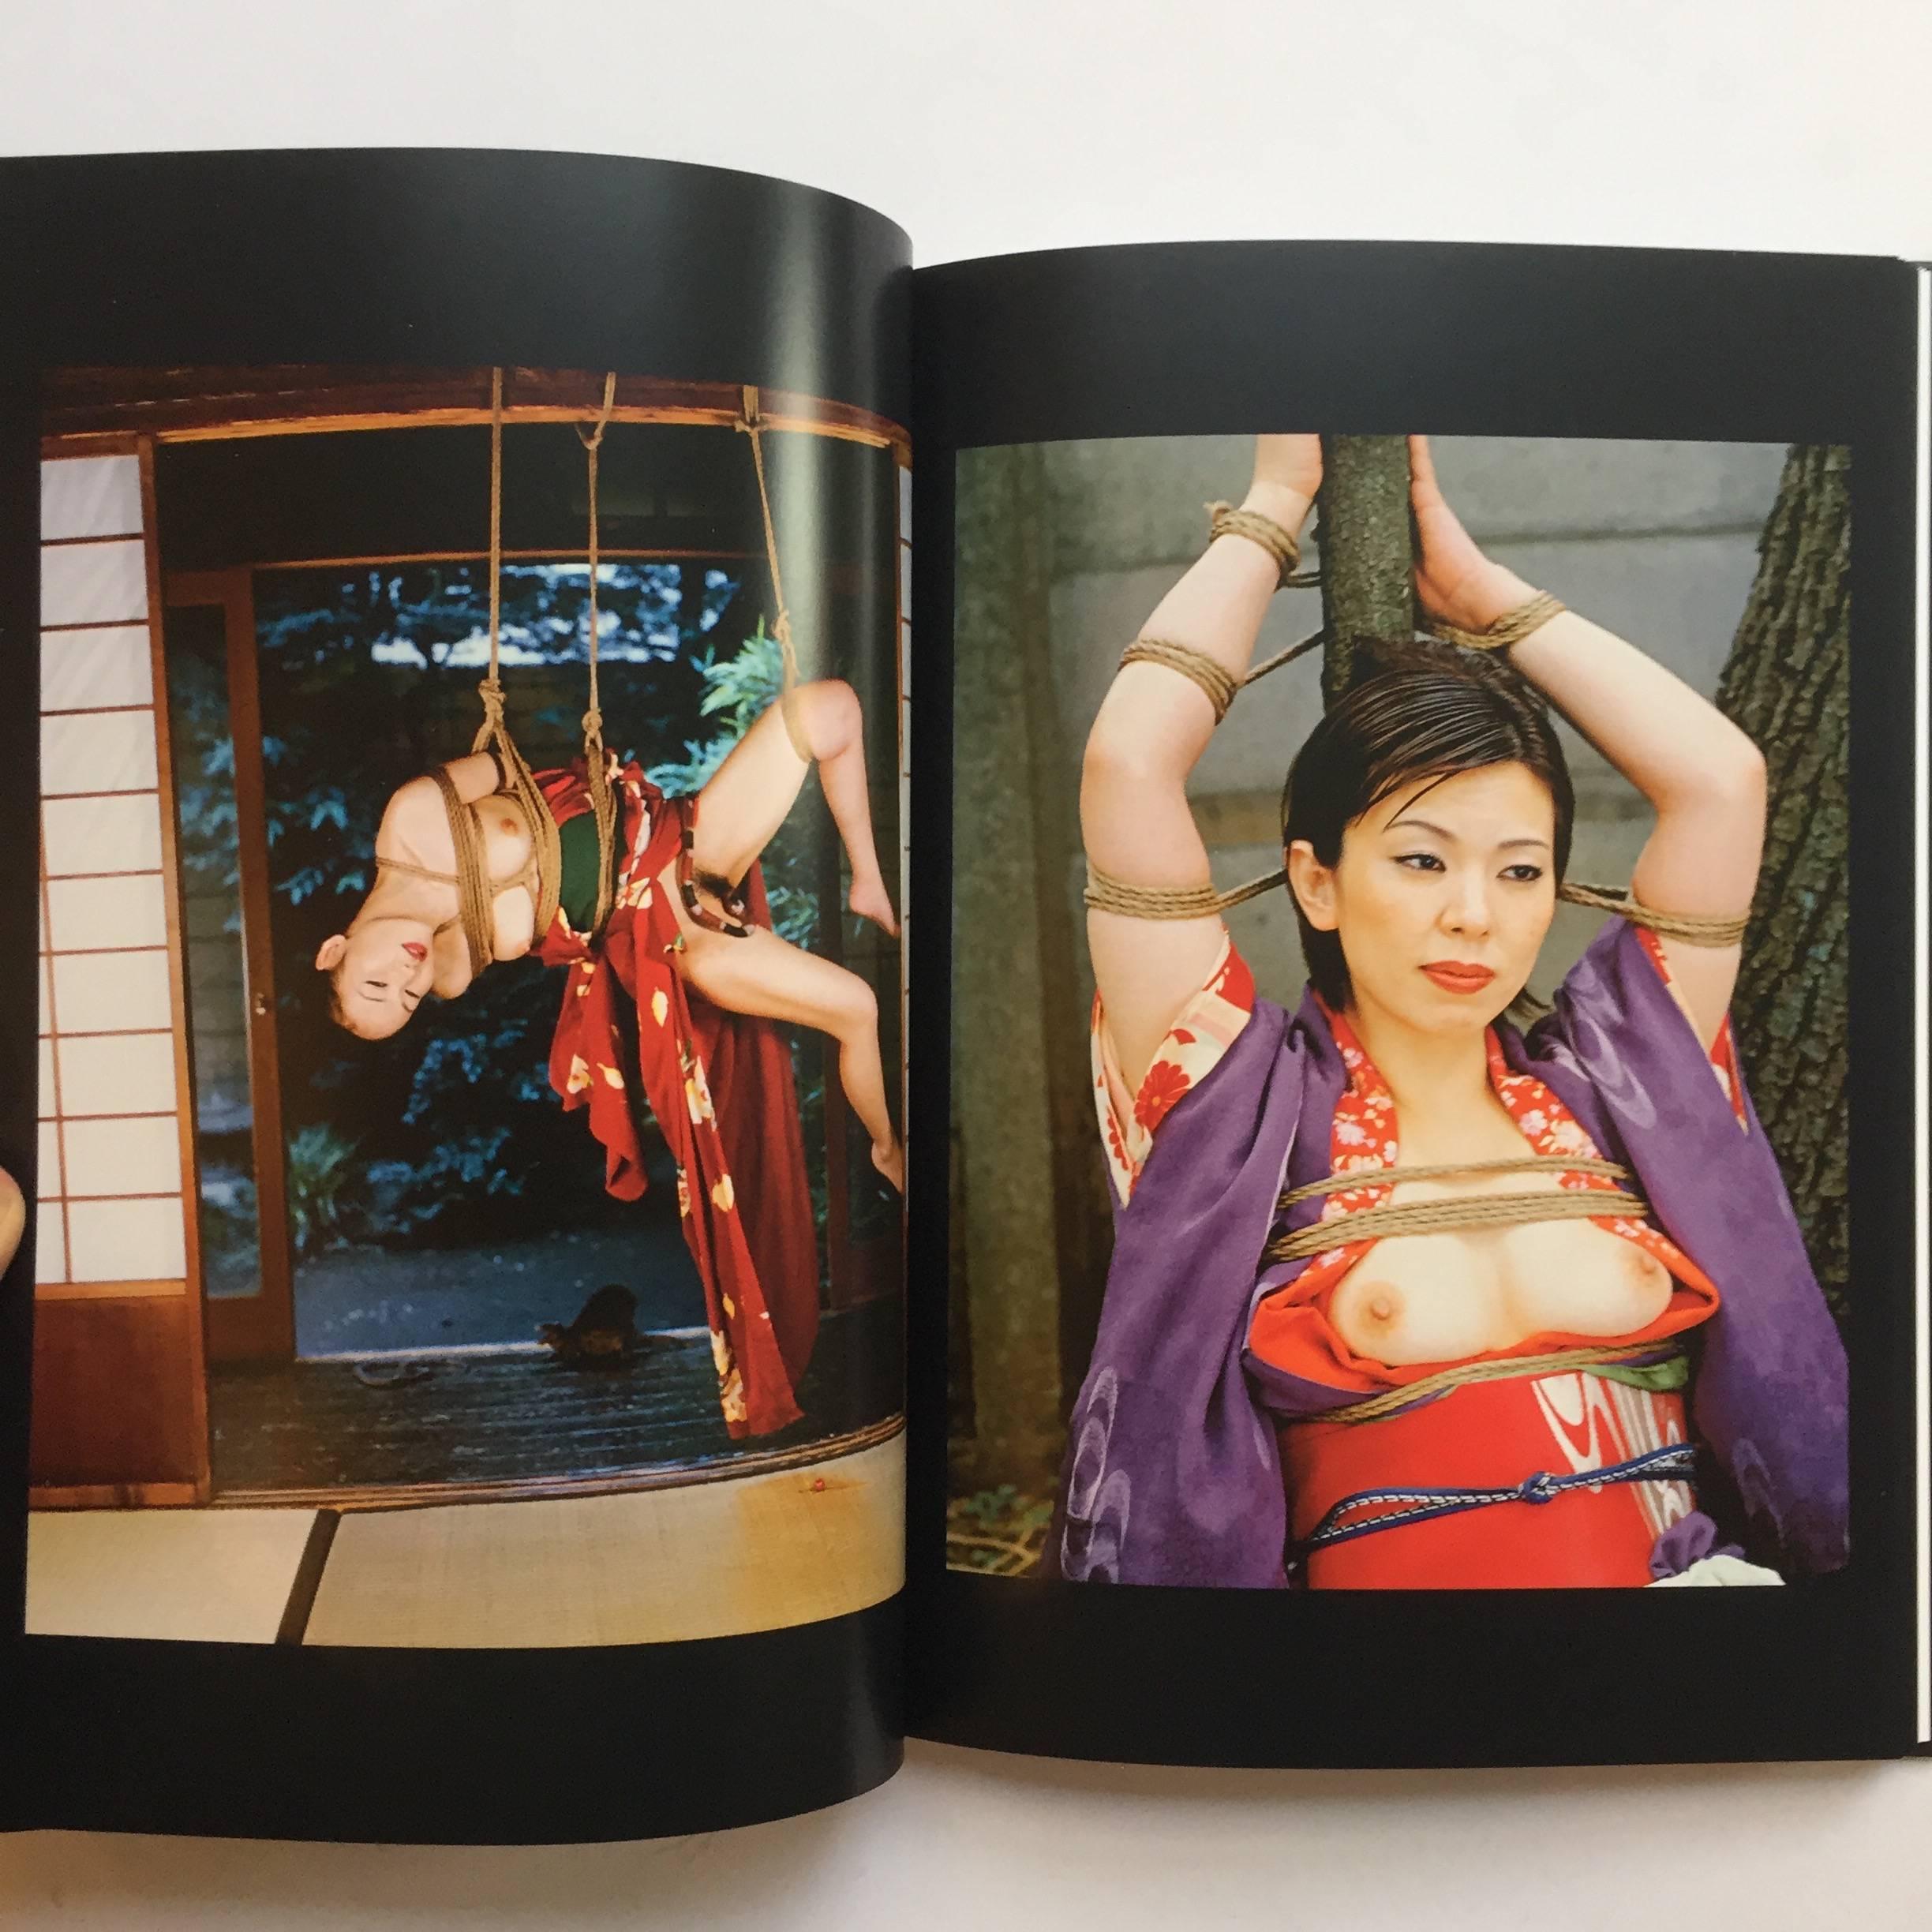 First Edition, published by Kehrer Verlag & Kestnergesellschaft, Germany, 2008.

With two volumes, one for each artist, housed jointly in a slipcase, this is a brilliant pictorial dialogue between two of Japans most famous artists, the contemporary